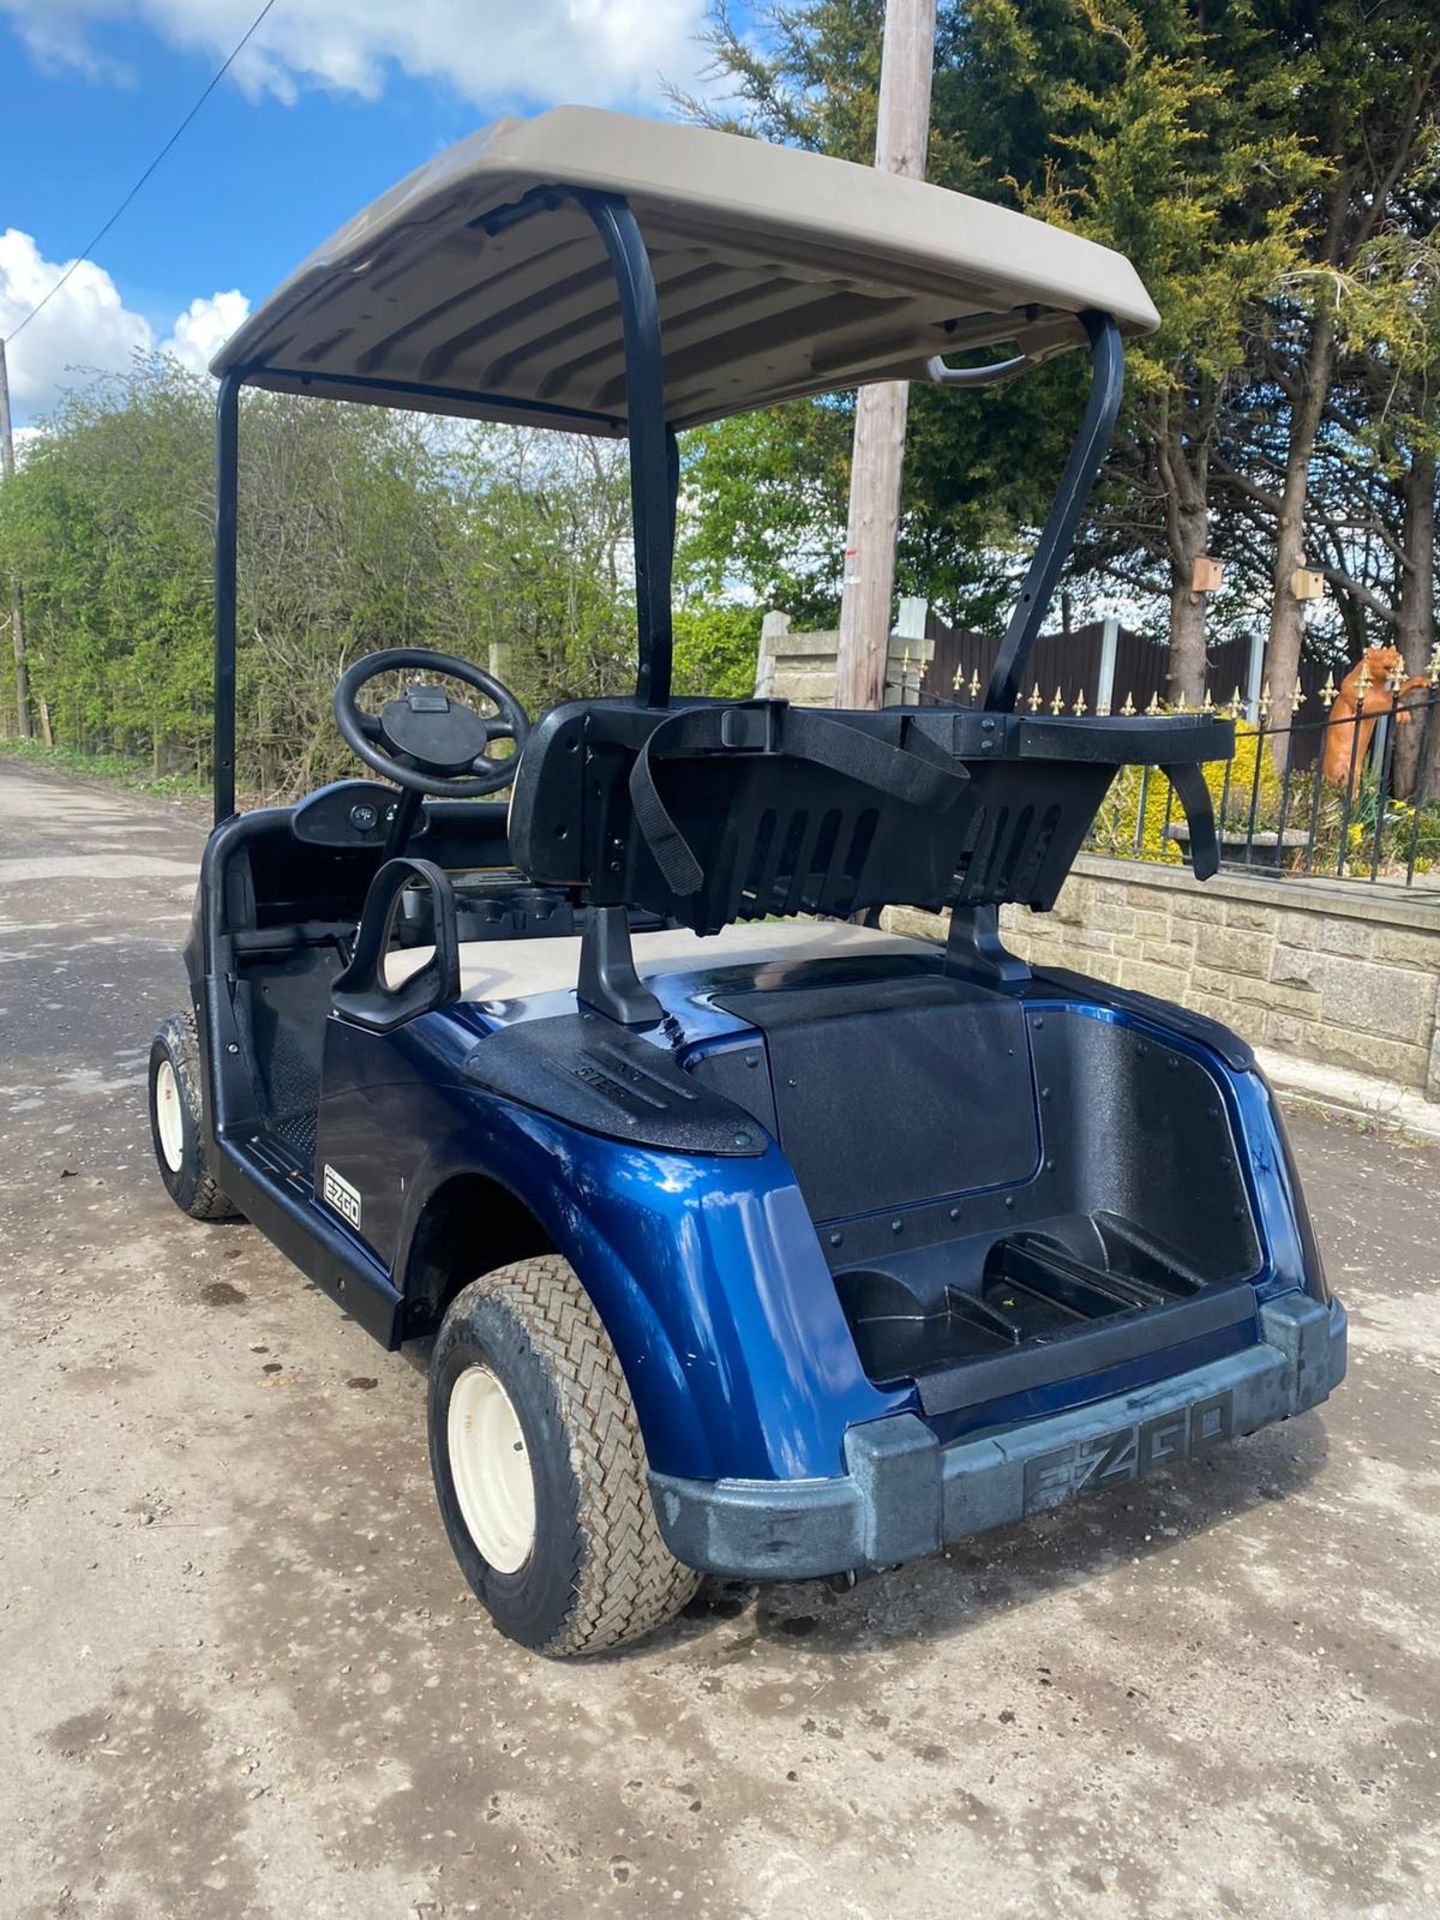 EZ-GO RXV GOLF CART BATTERY OPERATED, RUNS AND DRIVES, GOOD TYRES ALL ROUND *PLUS VAT* - Image 5 of 9